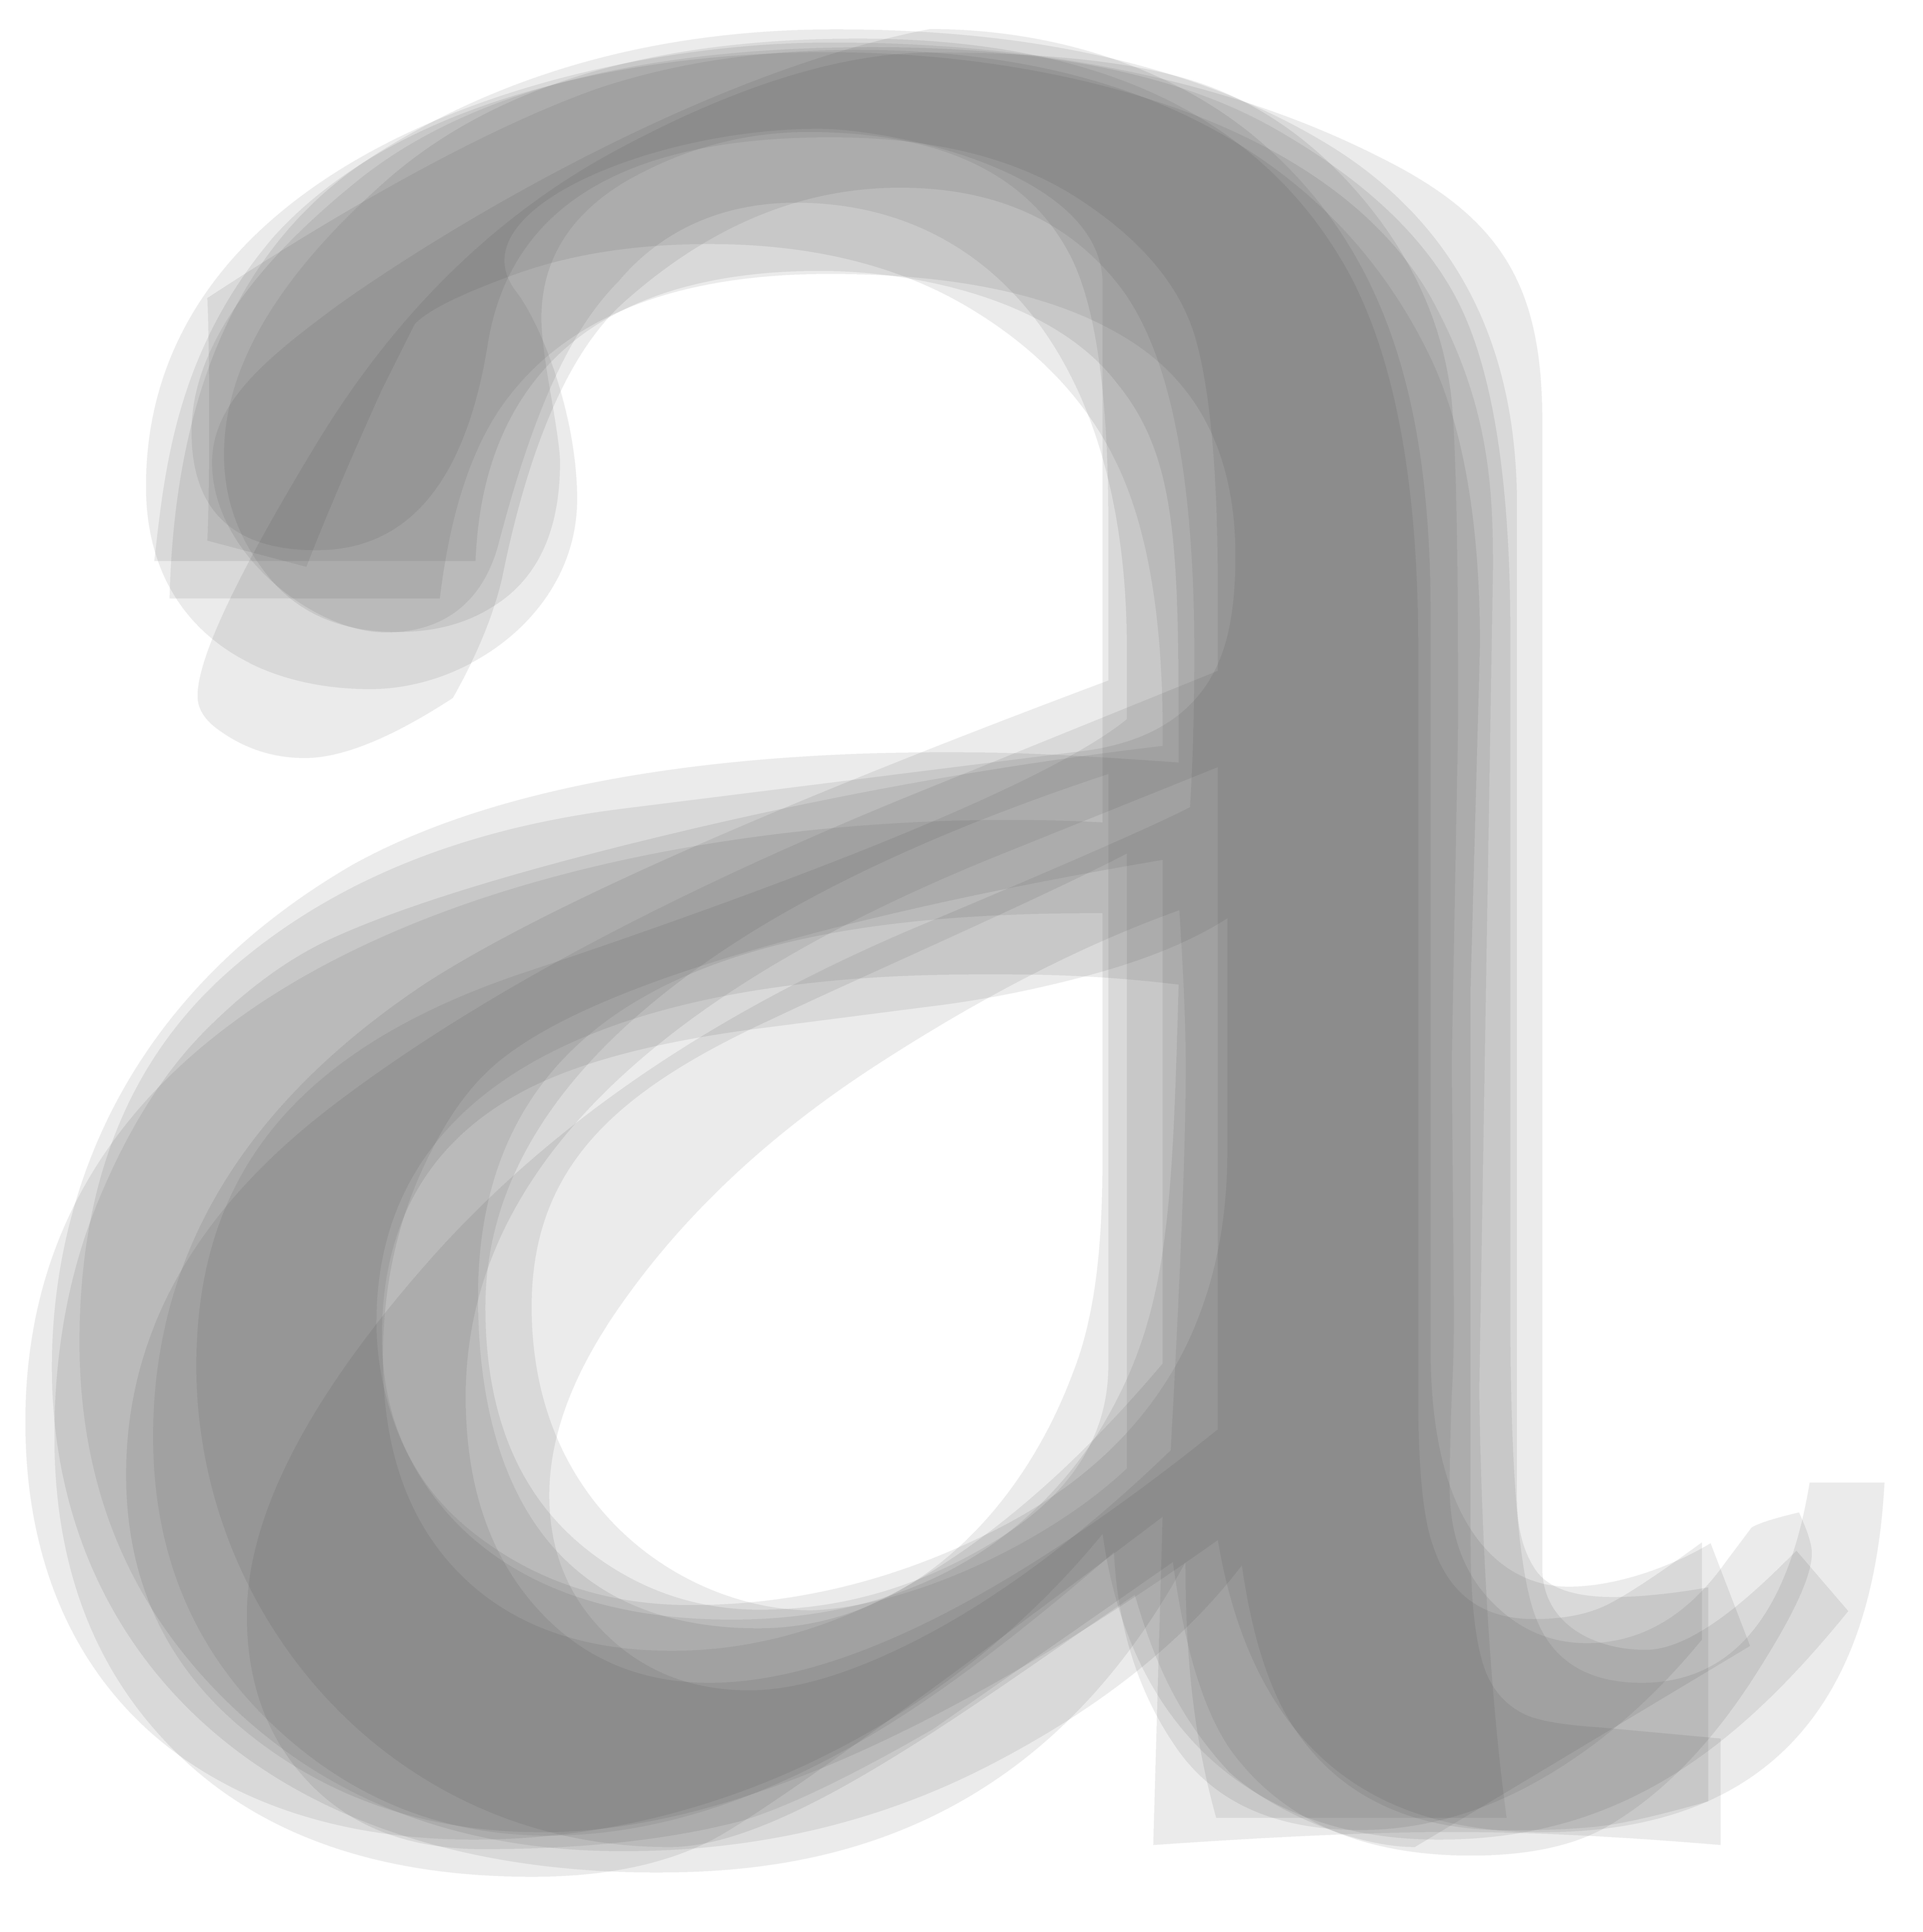 Superimposed letter a